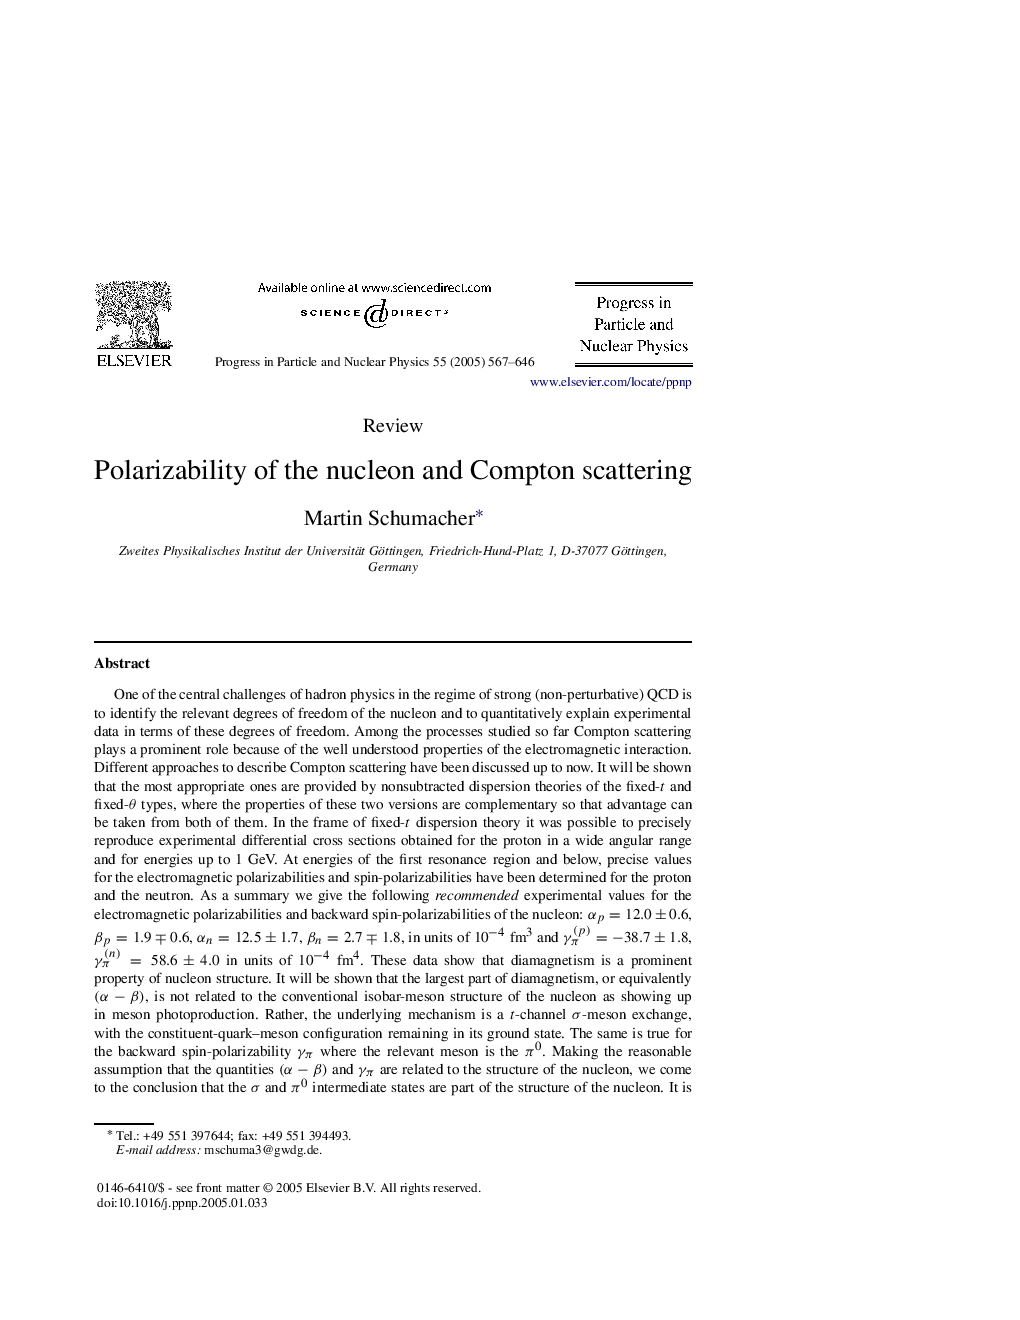 Polarizability of the nucleon and Compton scattering